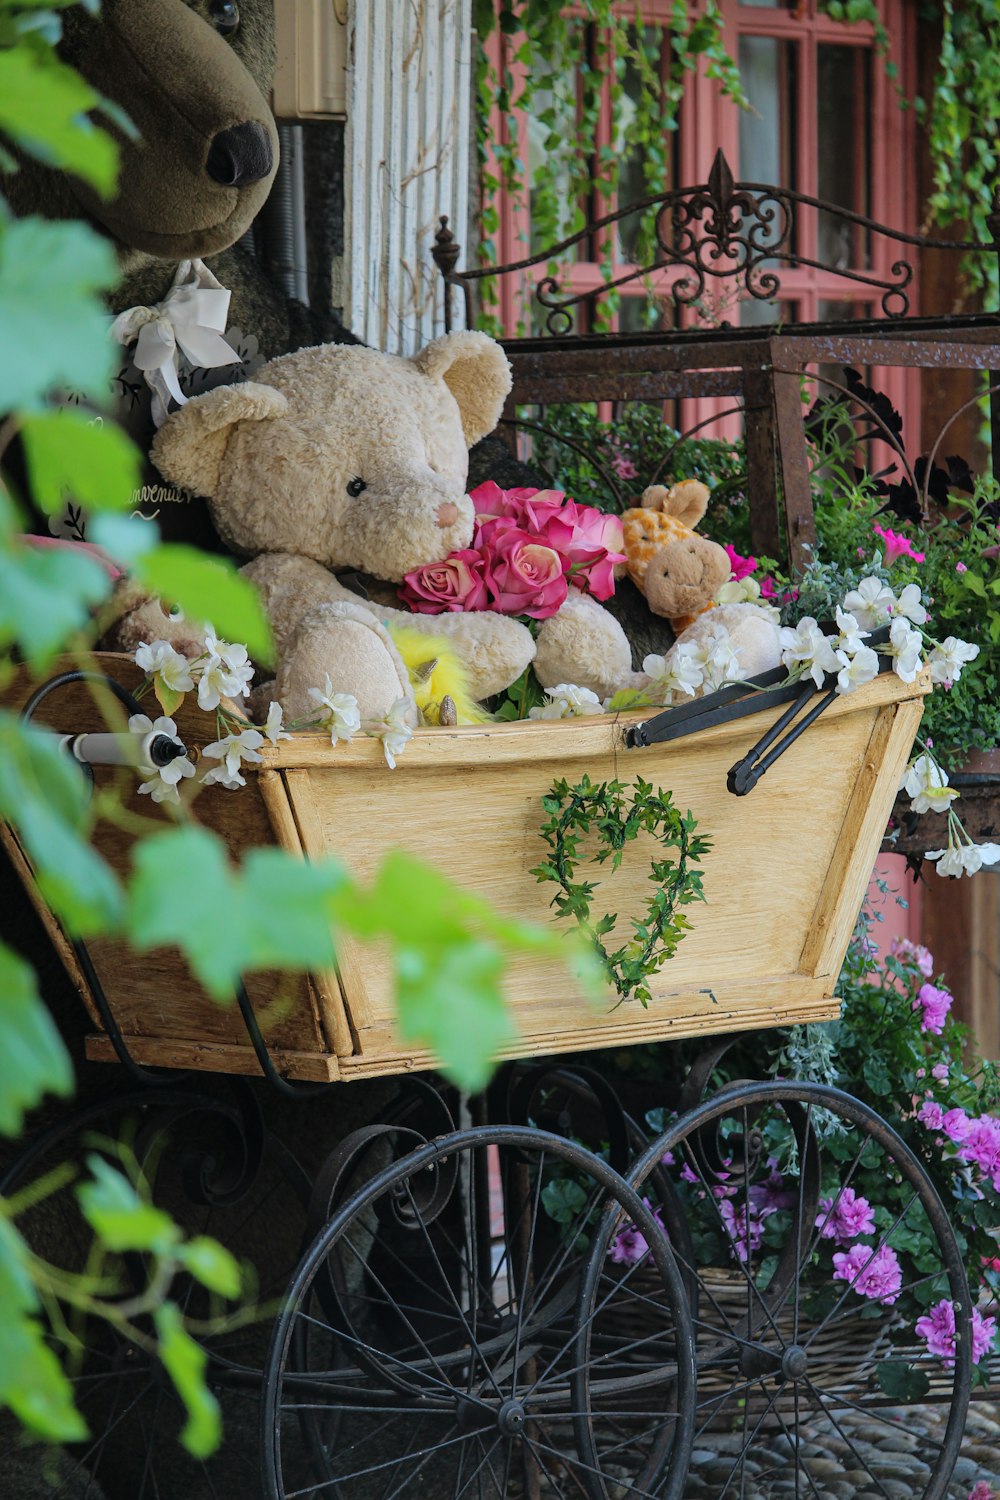 a teddy bear sitting on top of a wooden wagon filled with flowers